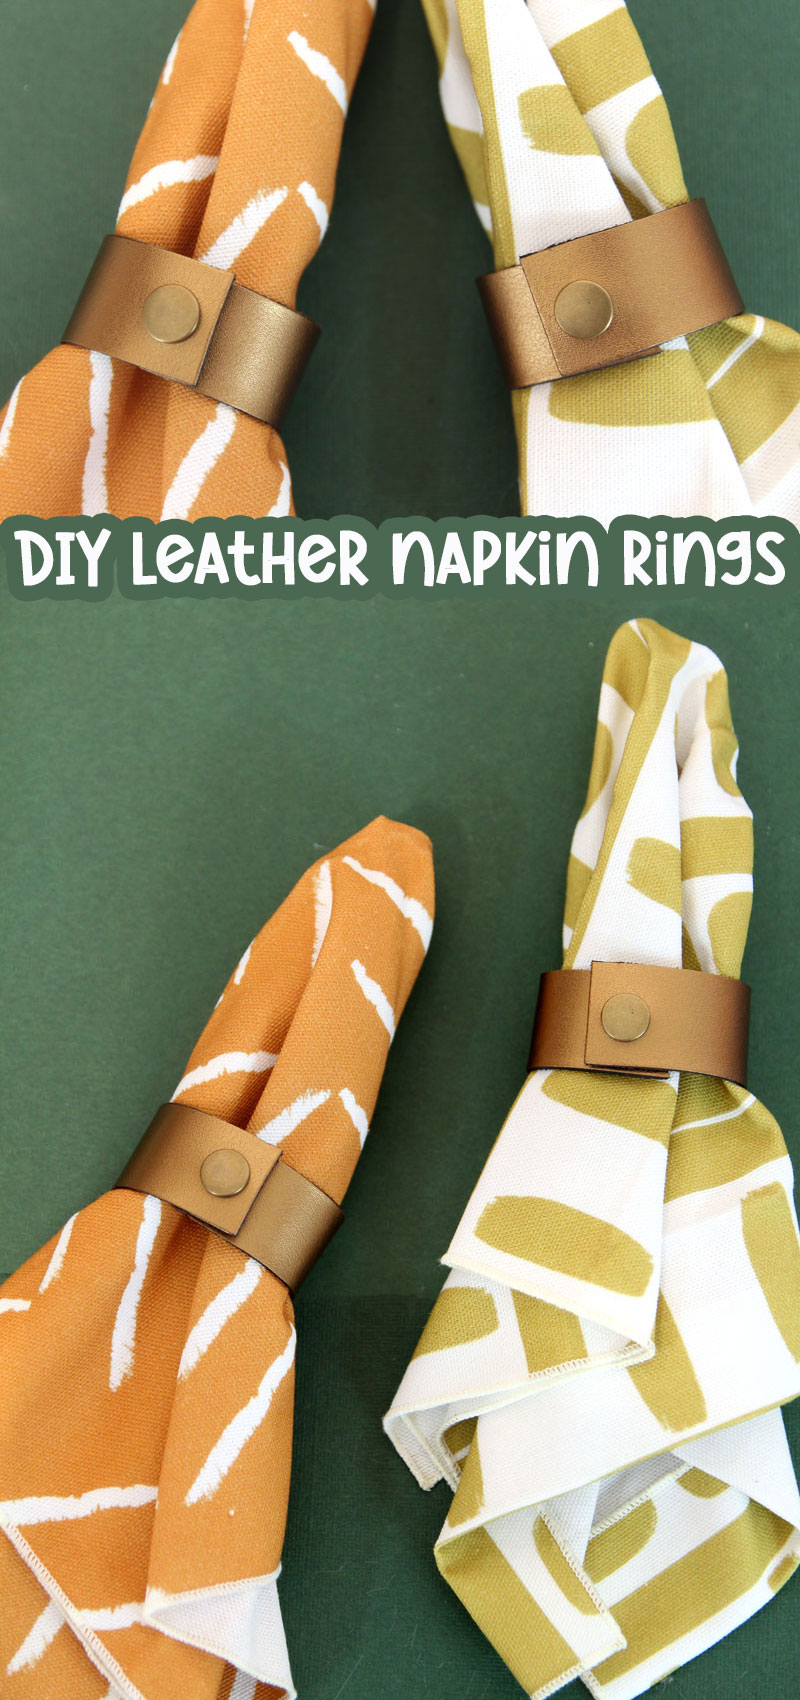 leather napkin rings on dark green background with orange and green napkins